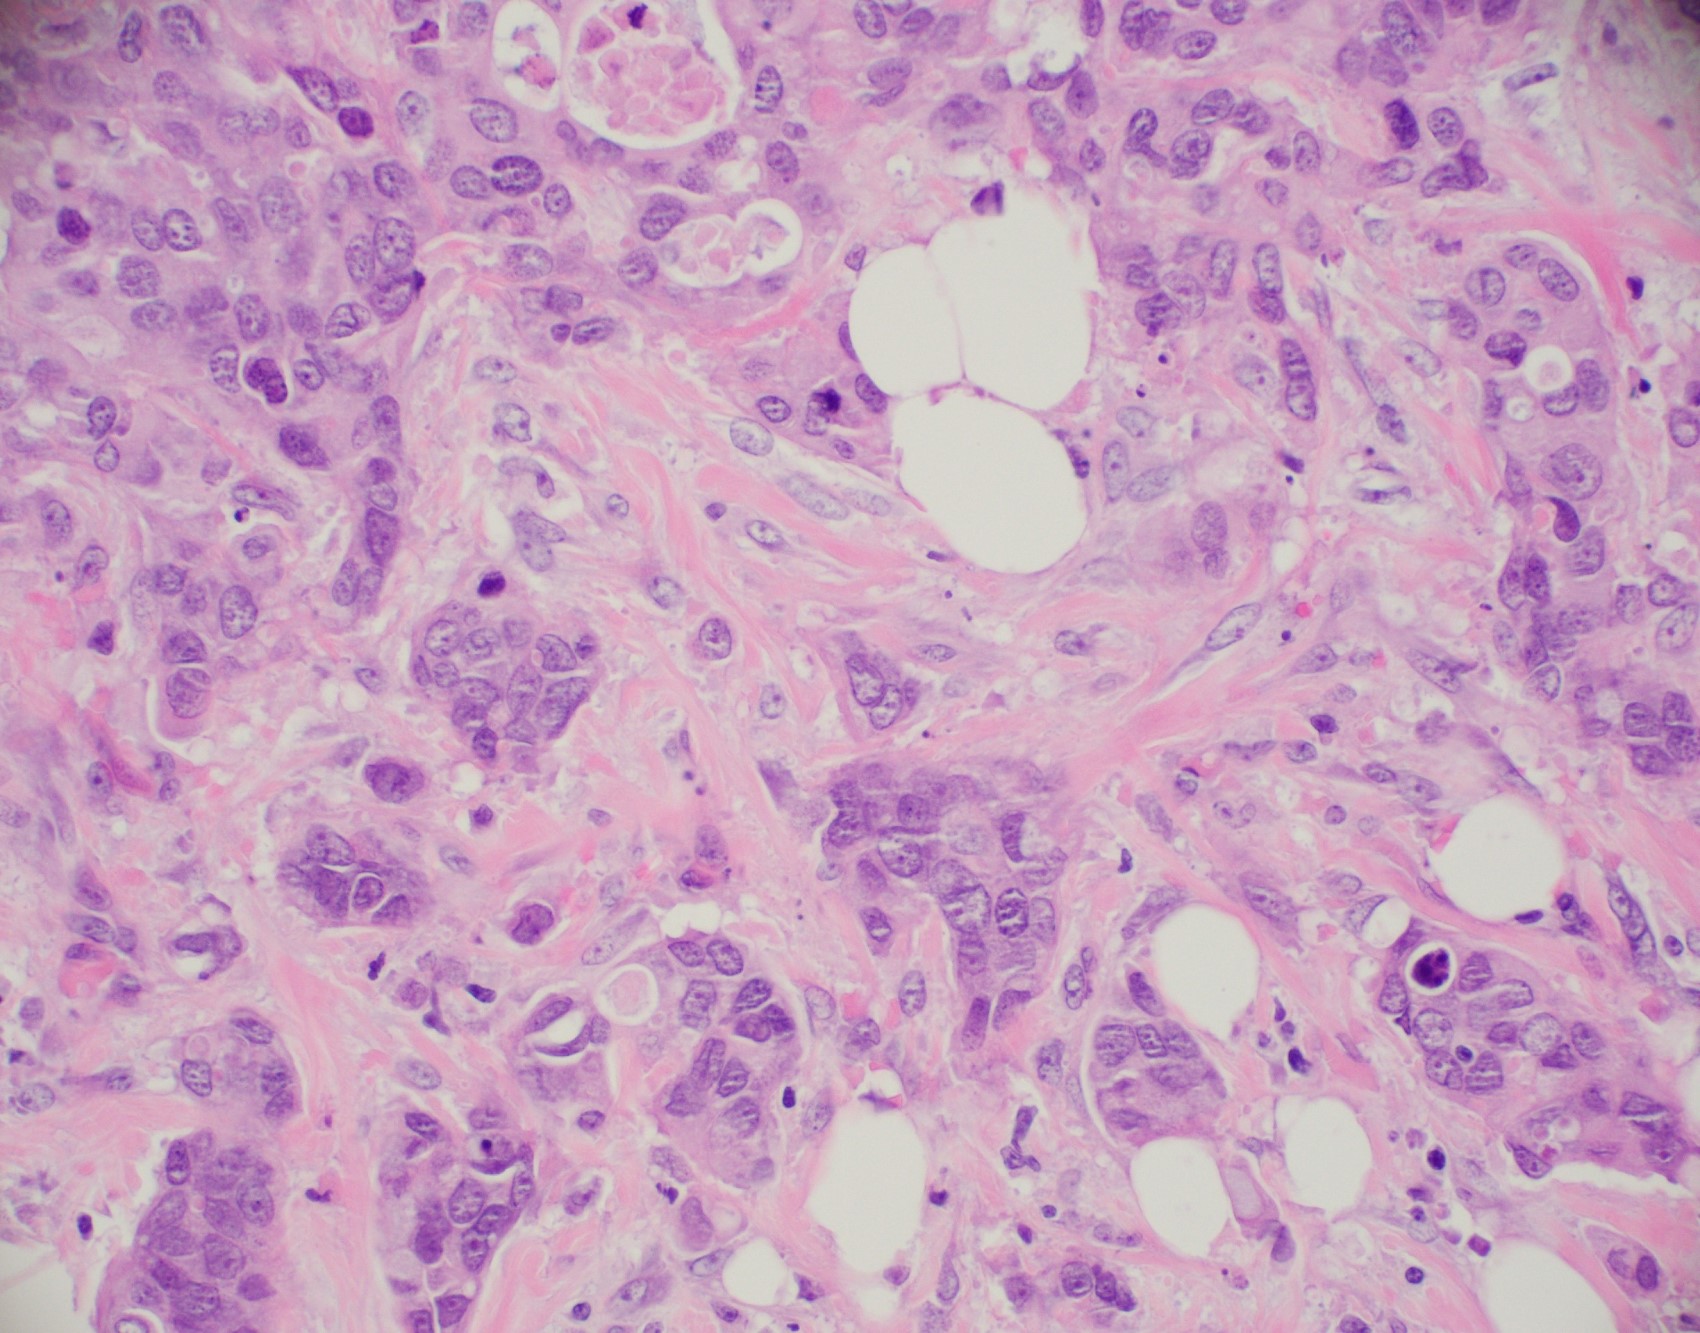 Invasive ductal carcinoma with scattered apoptotic cells